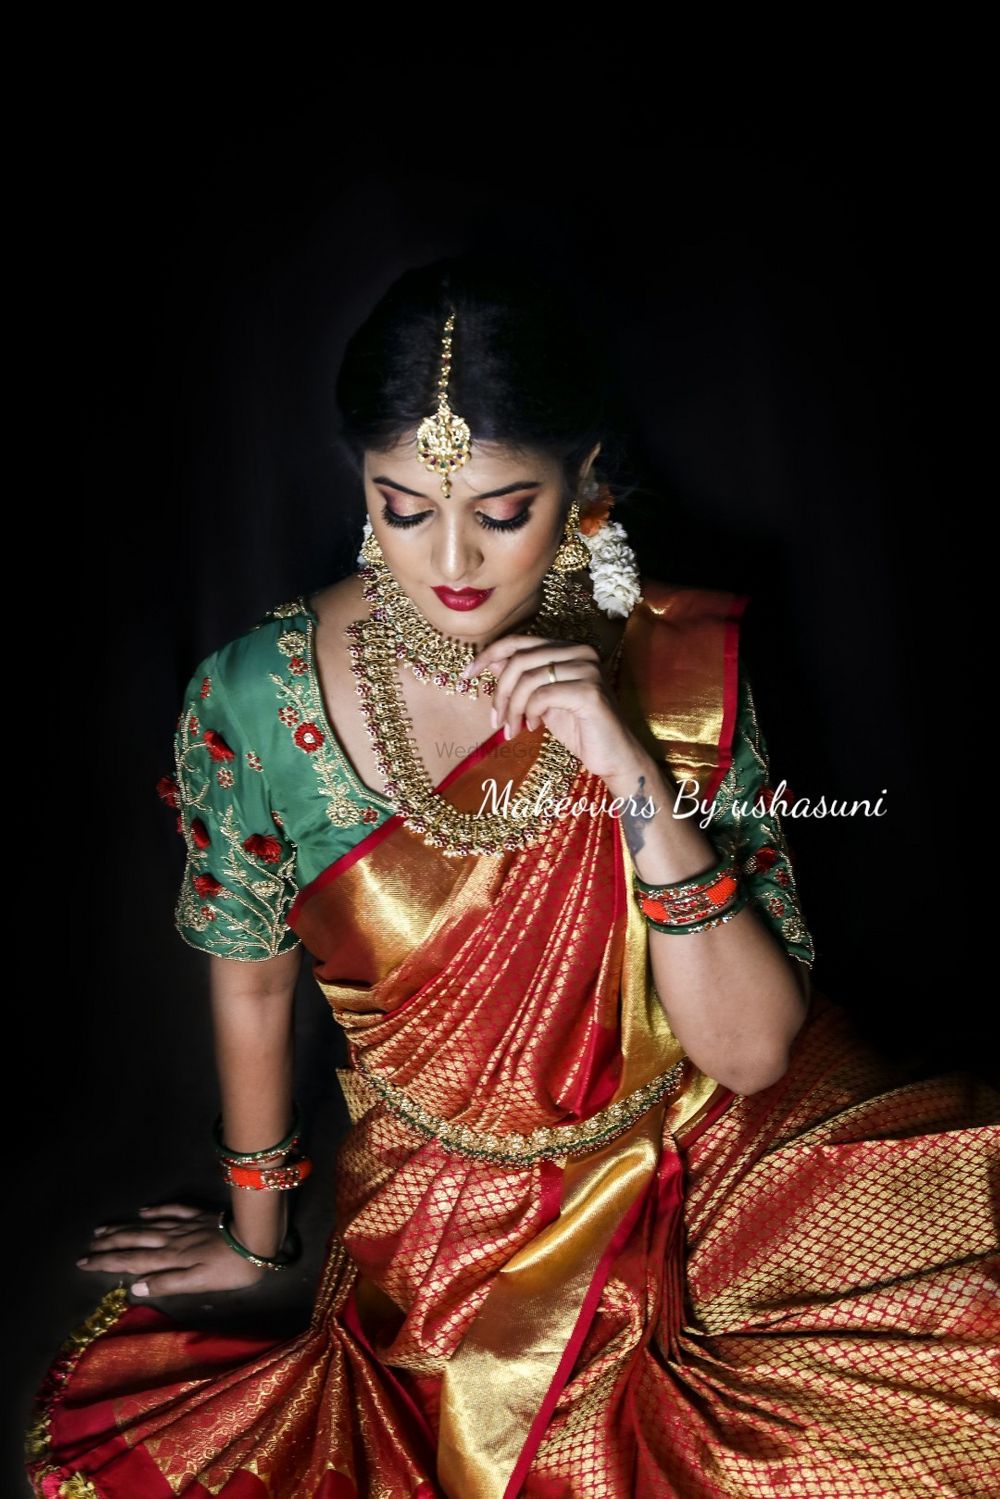 Photo From Diwali Shoot Makeover - By Makeover by Ushasuni